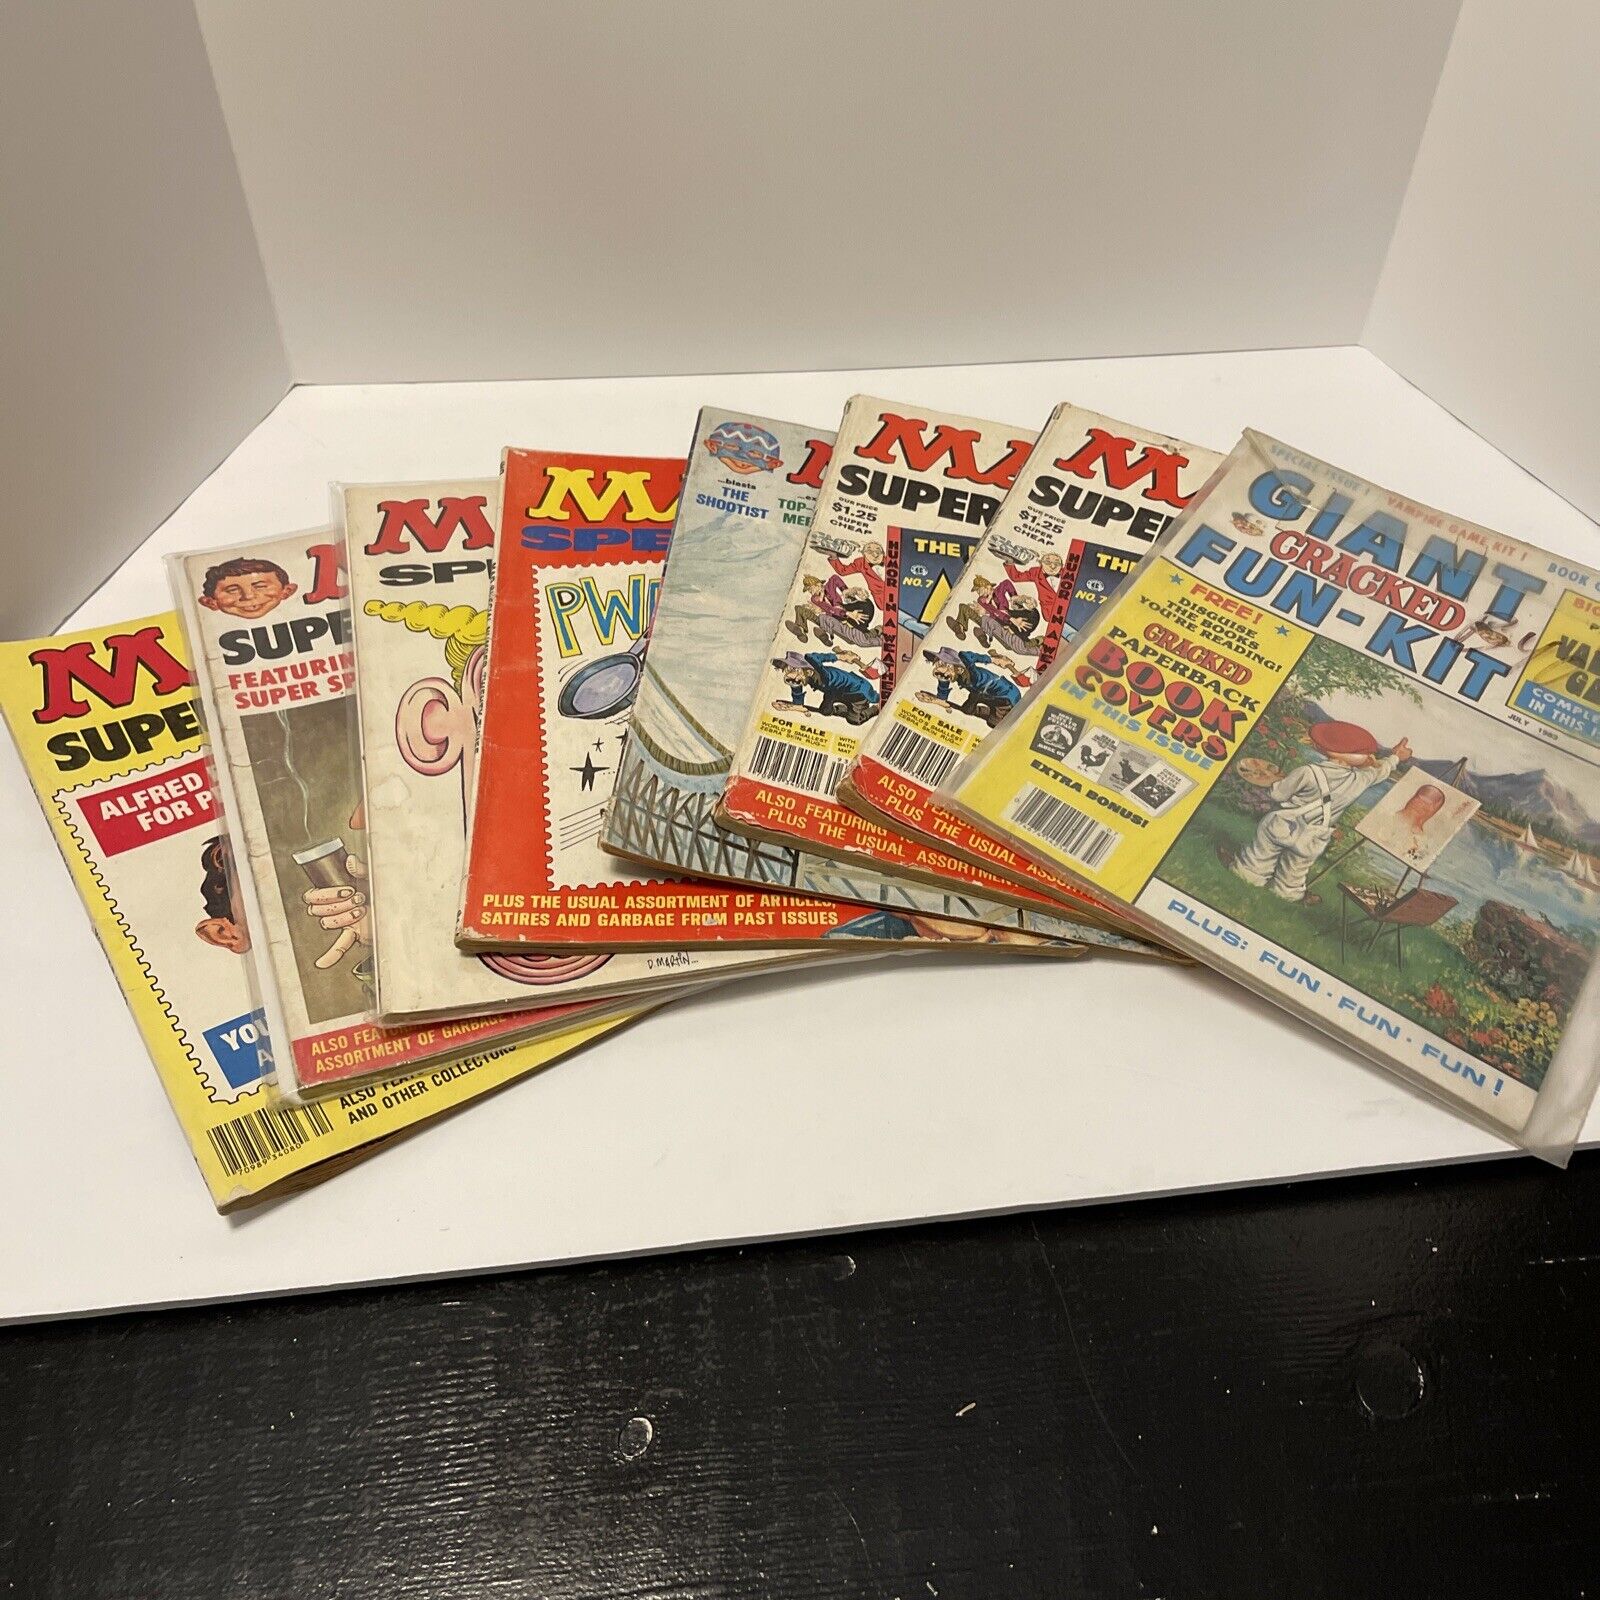 mad magazine Super Special, Special lot And 1 Giant Cracked Special Issue